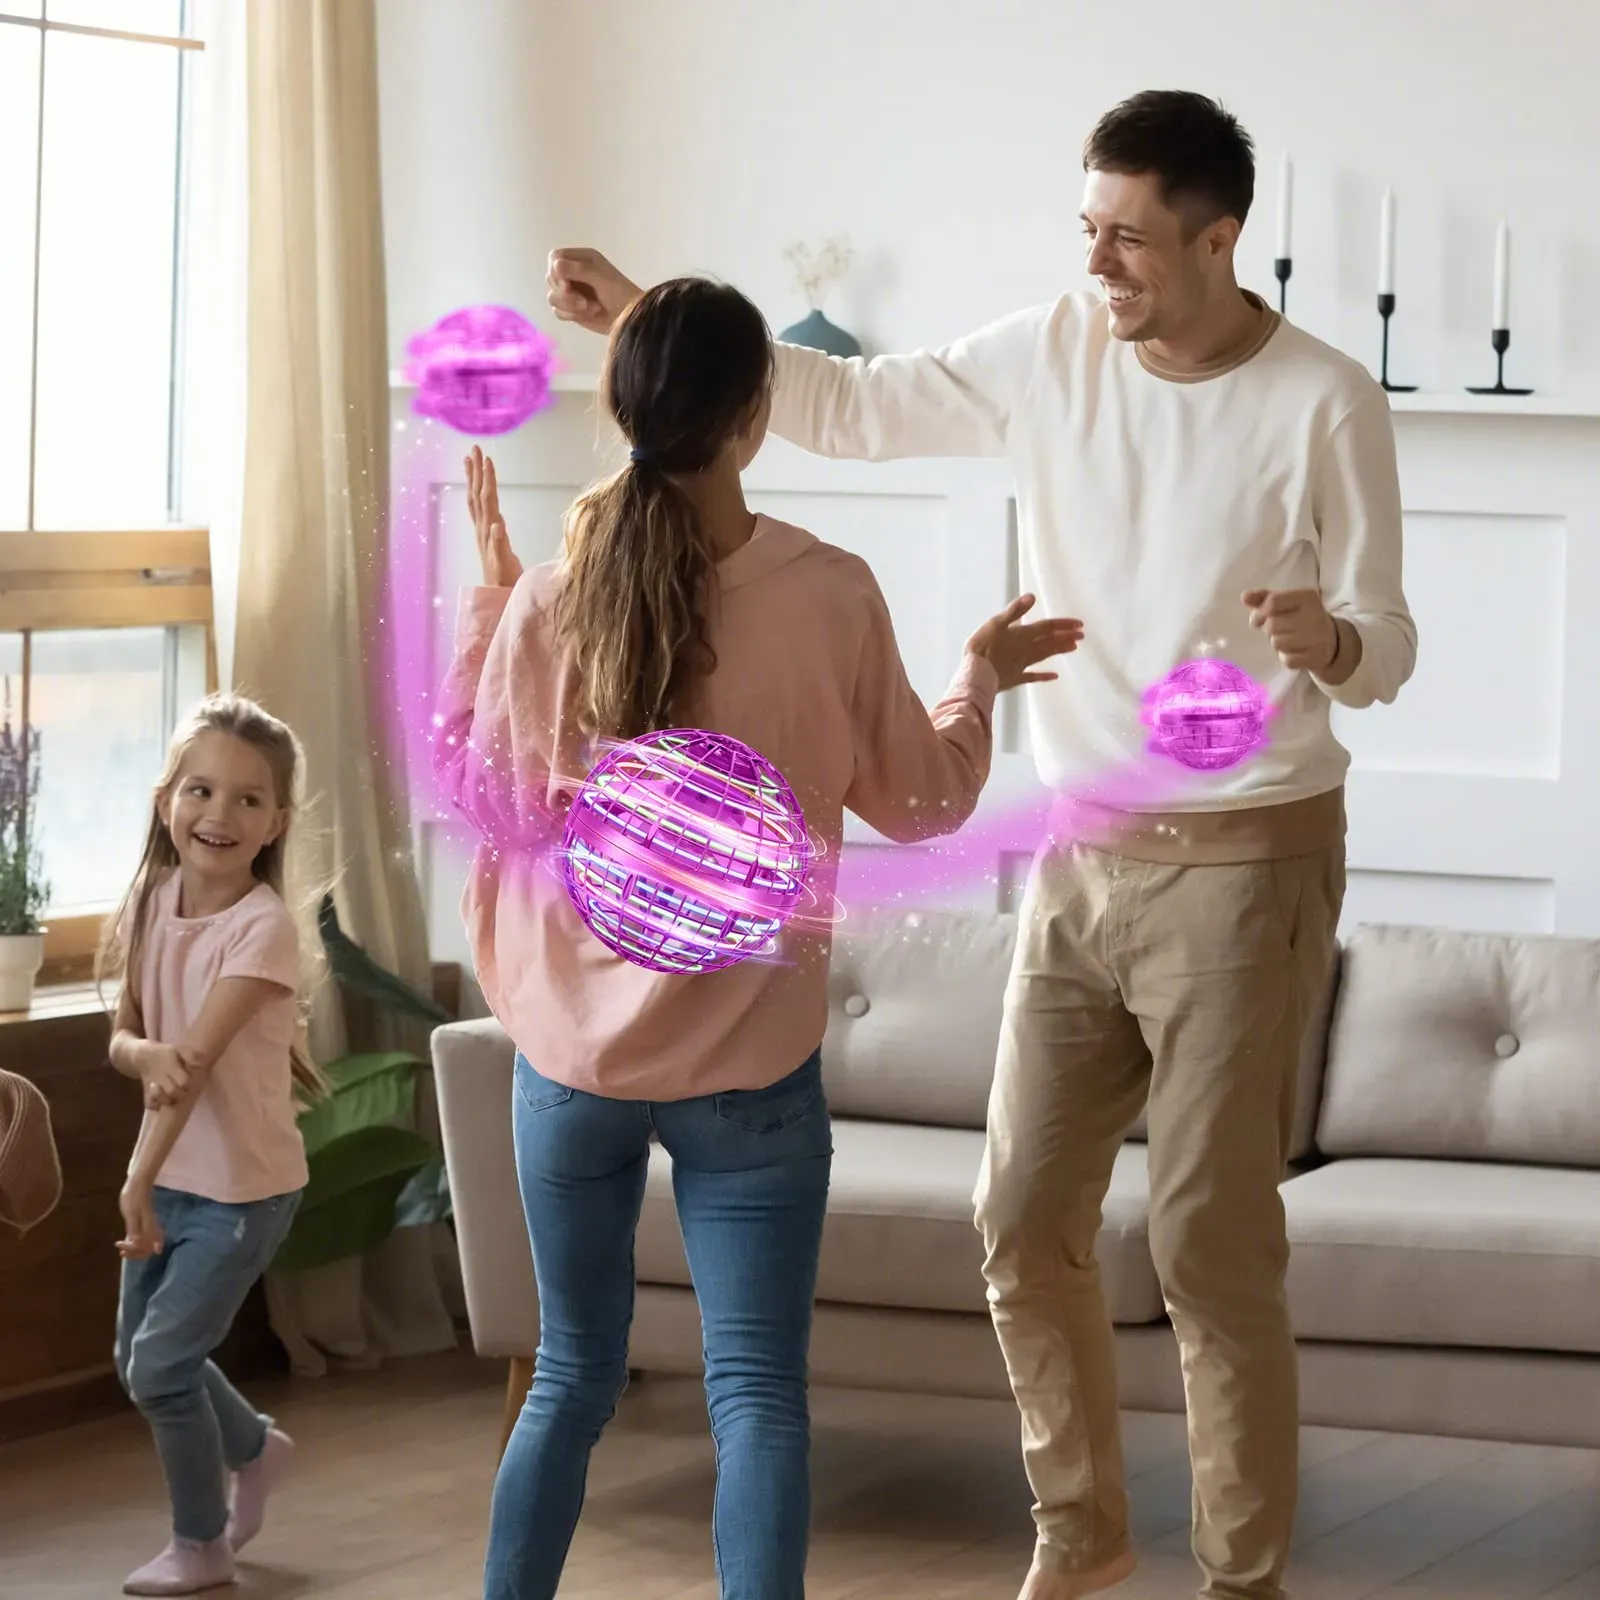 flying orb toys 2022 upgraded nebula orb toy intelligent magic boomerang ball flying spinner cool hover ball soaring drone space fly orb floating hoverball outdoor for kids adults boys girls pink